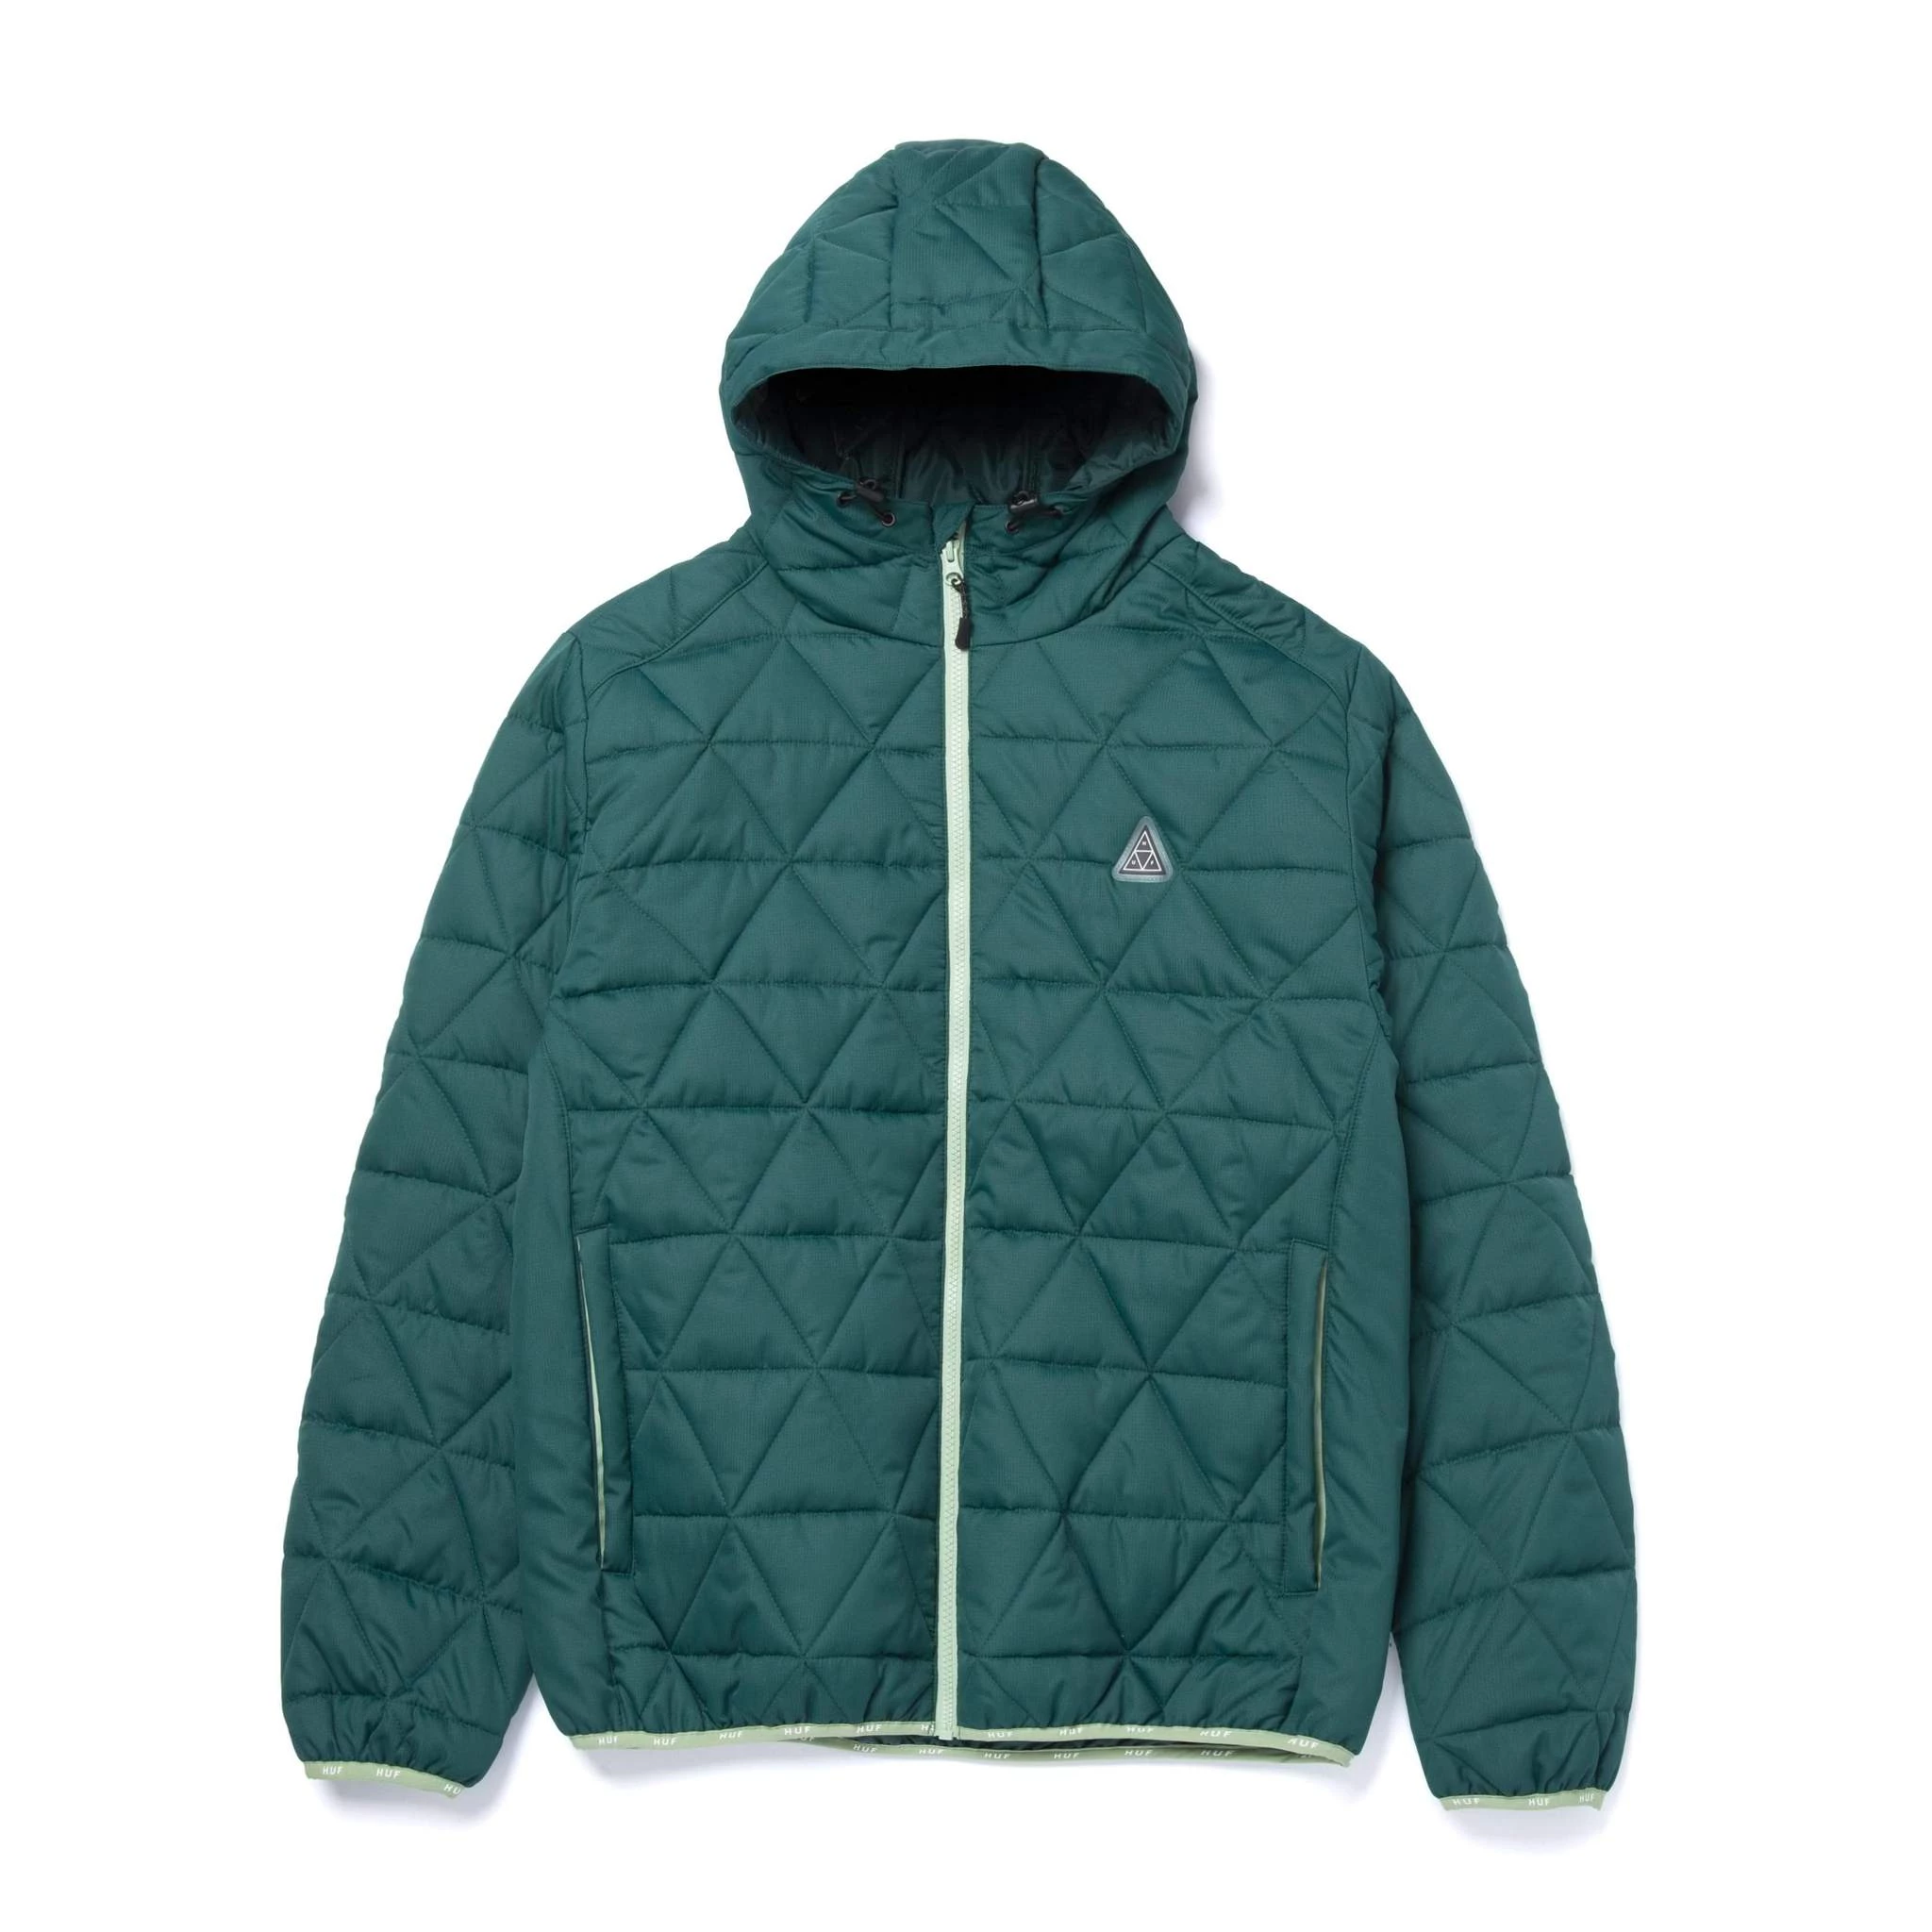 HUF Polygon Quilted Jacket zomerjas skate heren